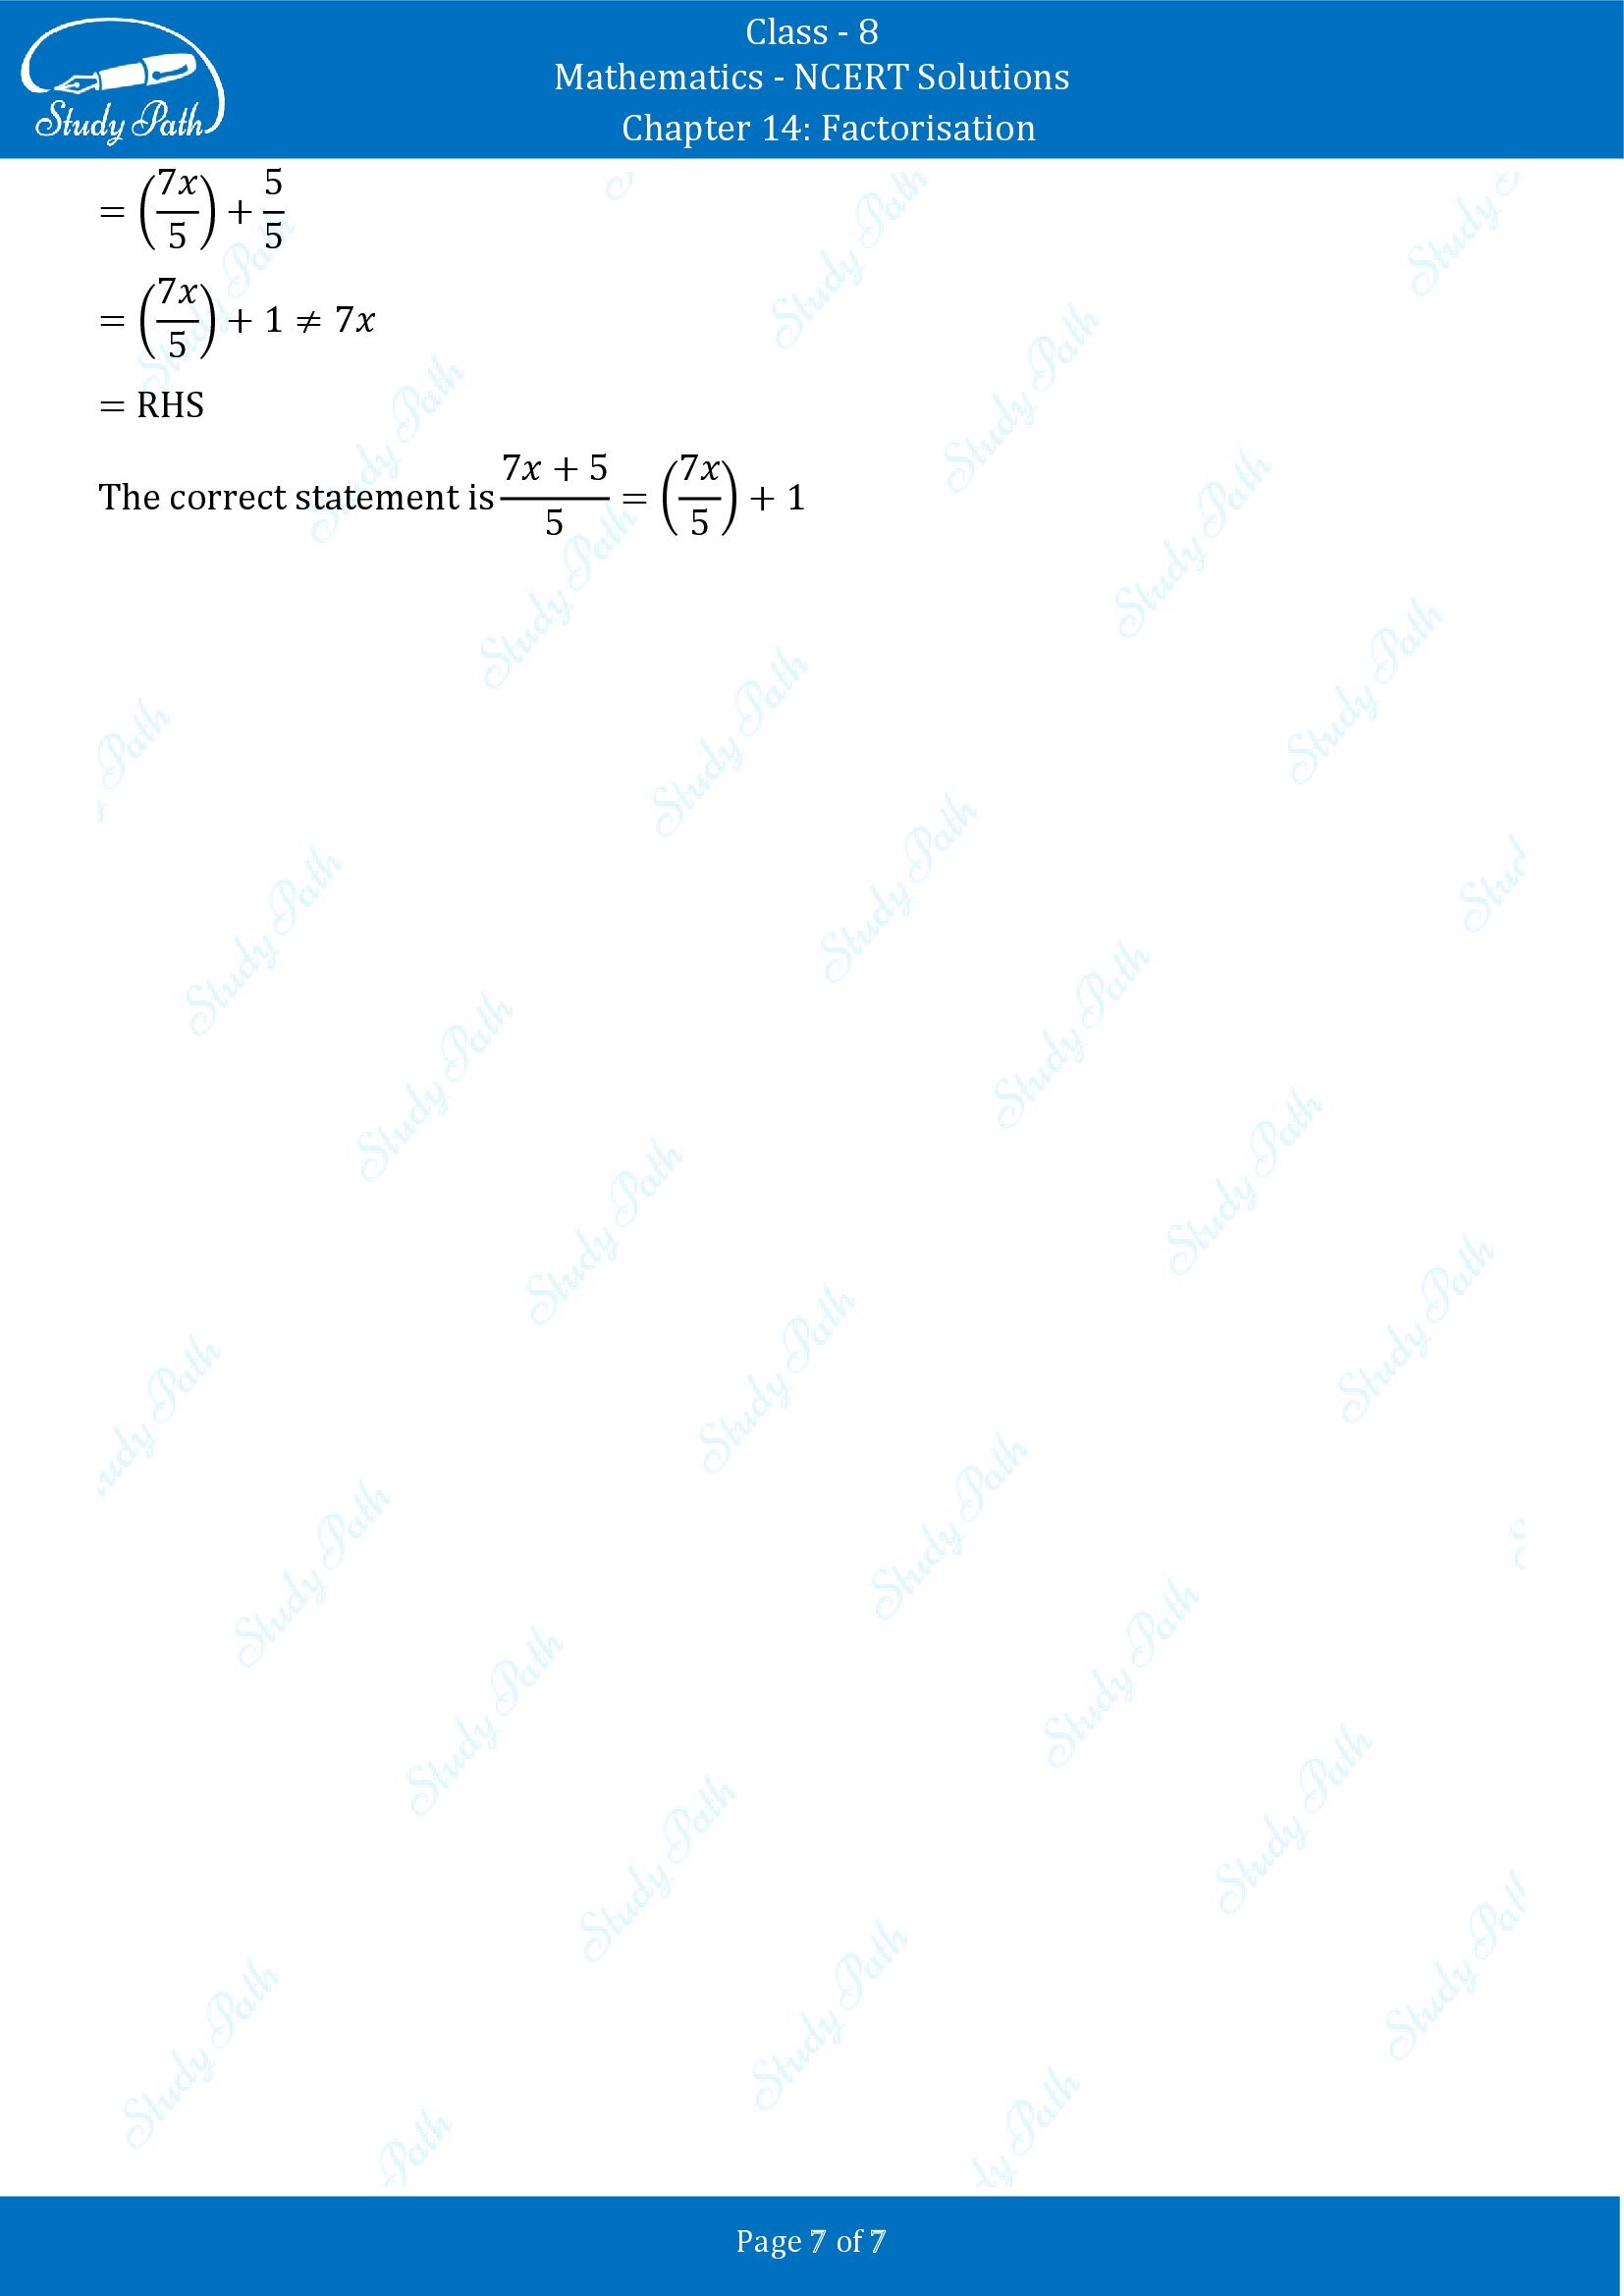 NCERT Solutions for Class 8 Maths Chapter 14 Factorisation Exercise 14.4 00007